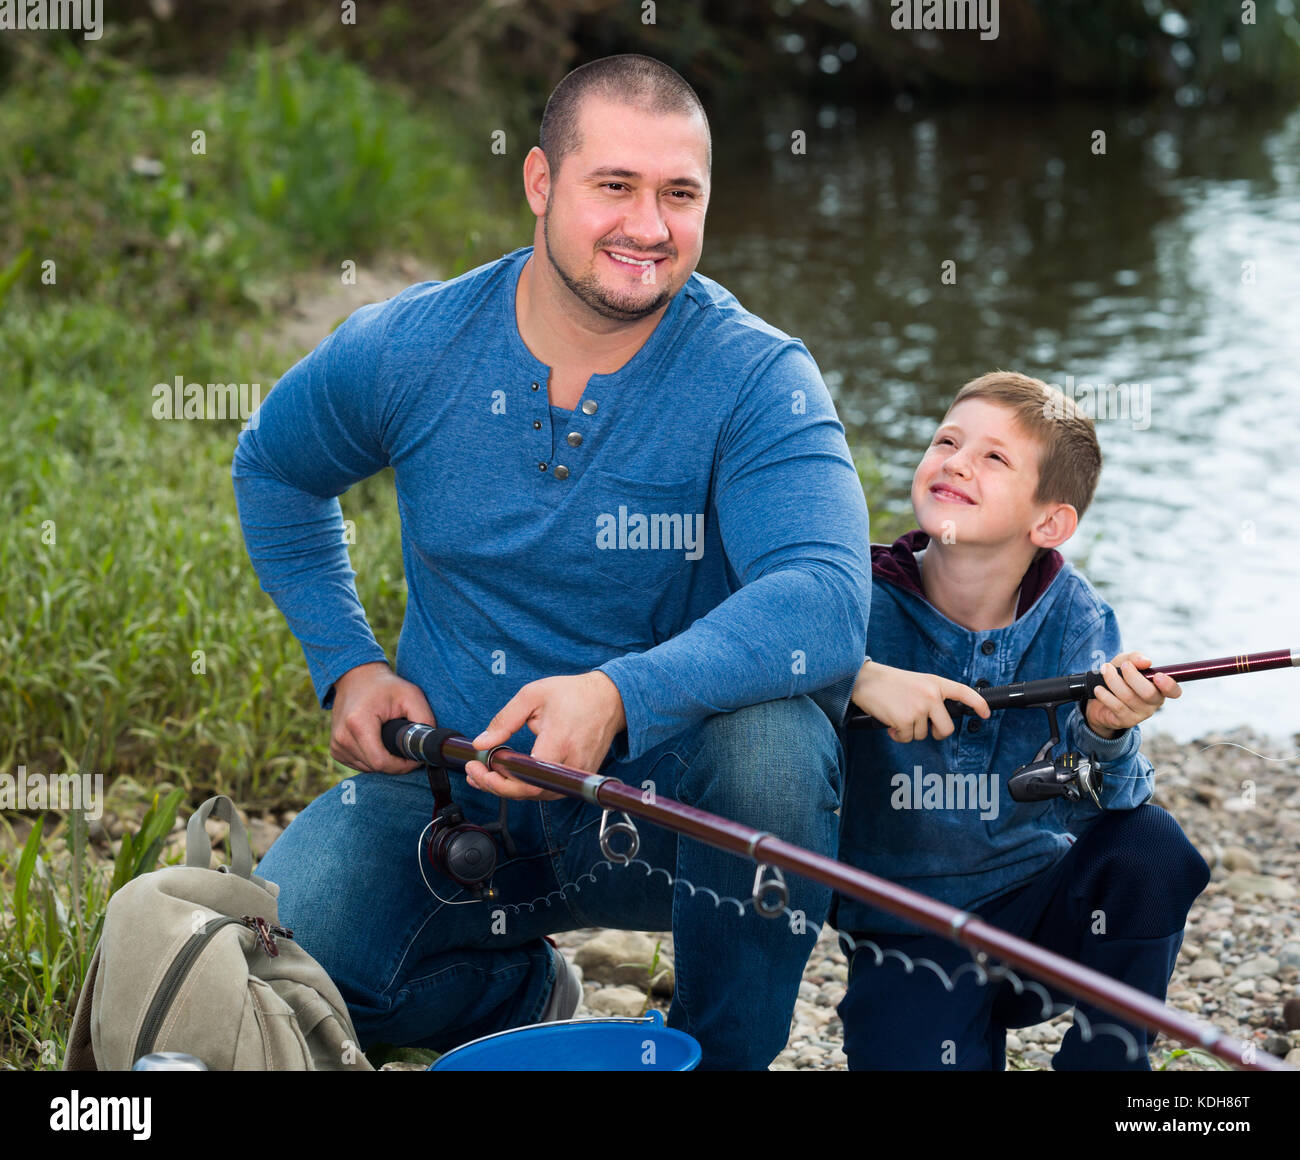 https://c8.alamy.com/comp/KDH86T/laughing-father-and-boy-fishing-with-rods-in-summer-day-KDH86T.jpg